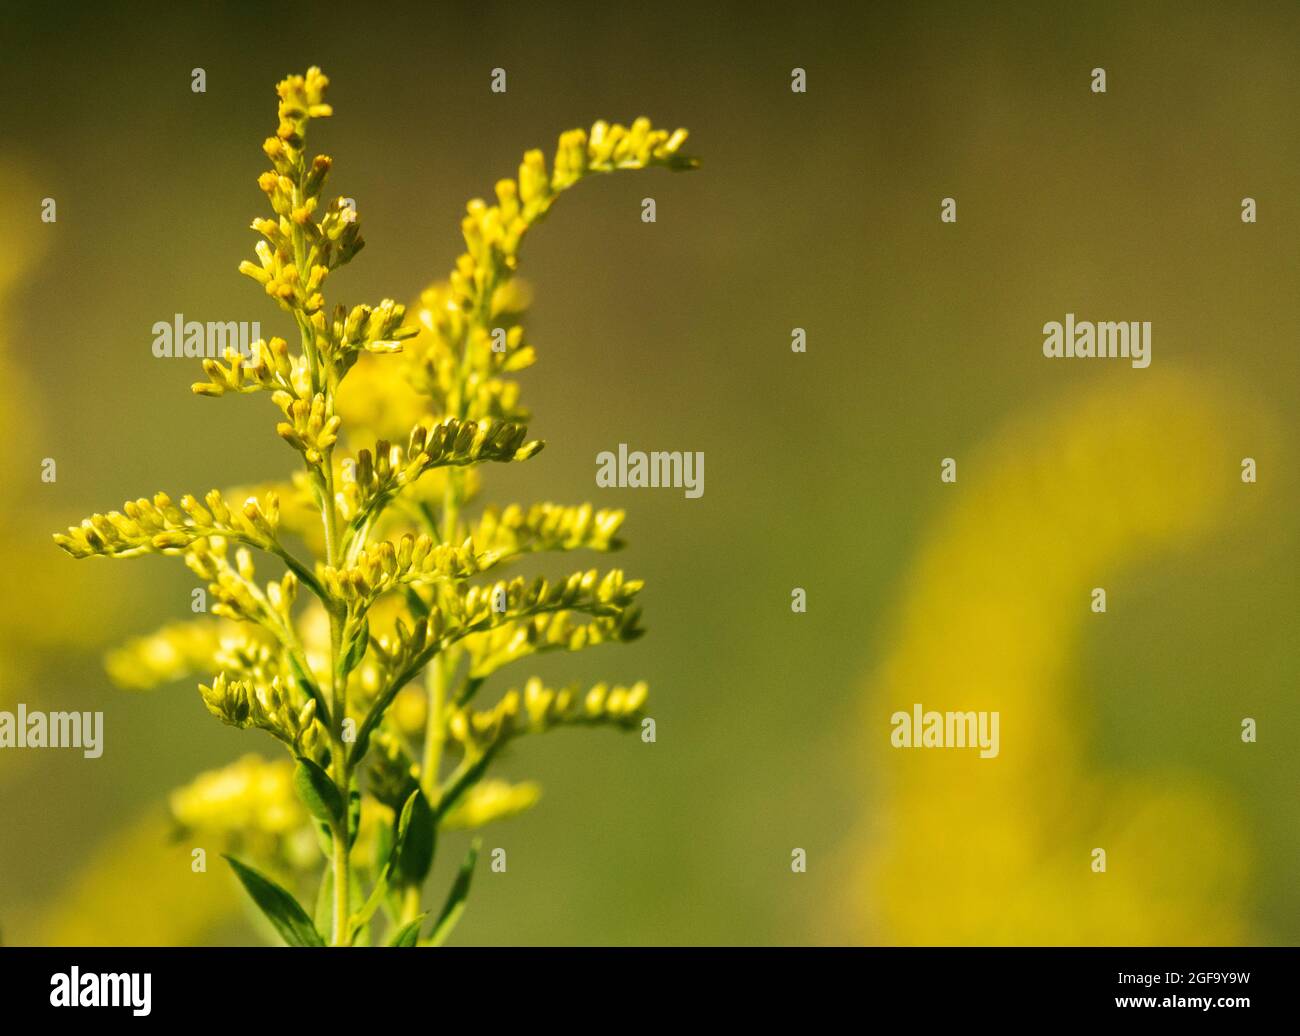 A close up view of Golden Rod budding out.  Copy space to the right. Stock Photo